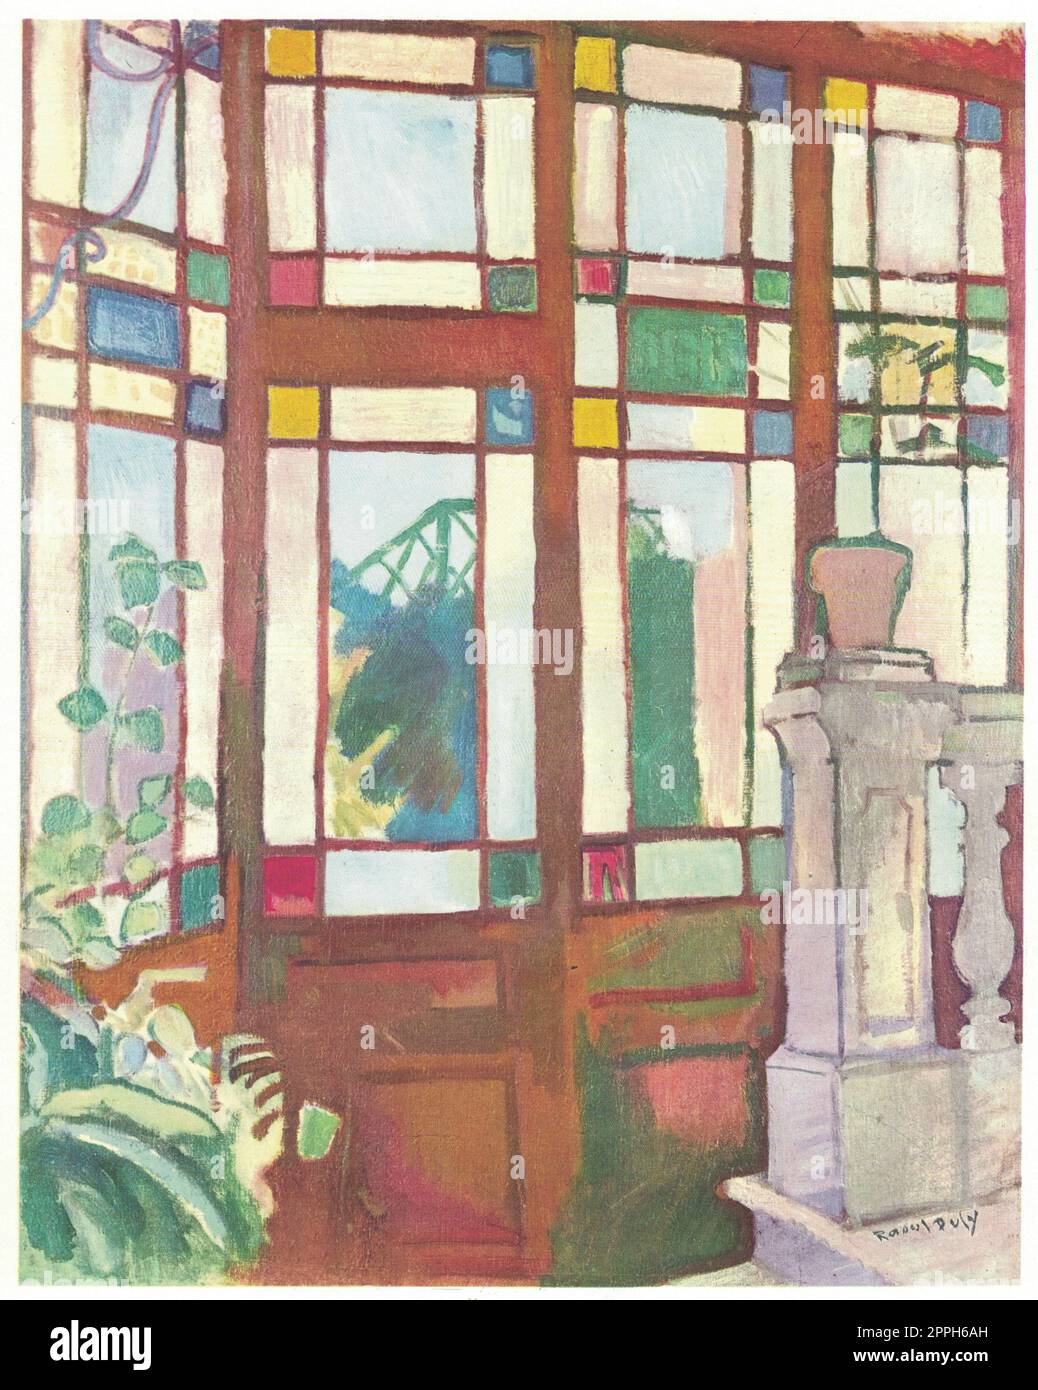 Window with coloured glasses, 1906. Painting by Raoul Dufy. Raoul Dufy, 3 June 1877- 23 March 1953 was a French Fauvist painter, brother of Jean Dufy. He developed a colorful, decorative style that became fashionable for designs of ceramics and textiles, Stock Photo